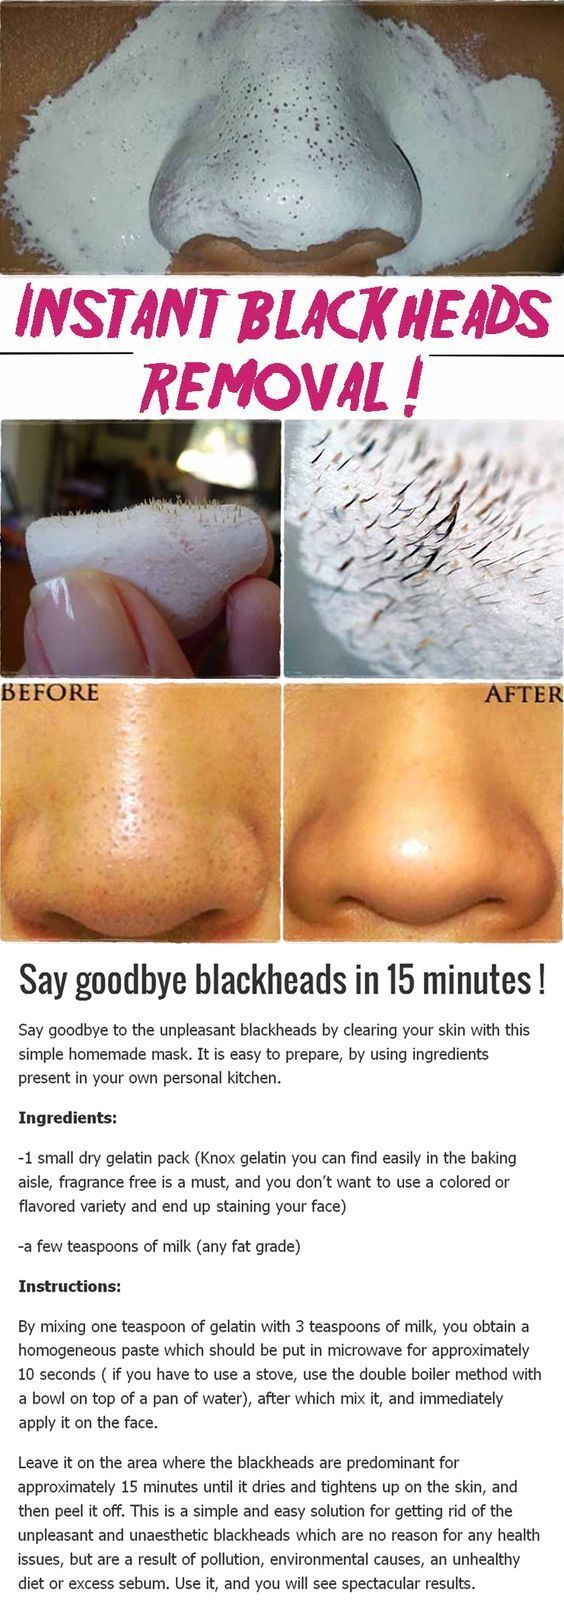 SAY GOODBYE BLACKHEADS IN 15 MINUTES